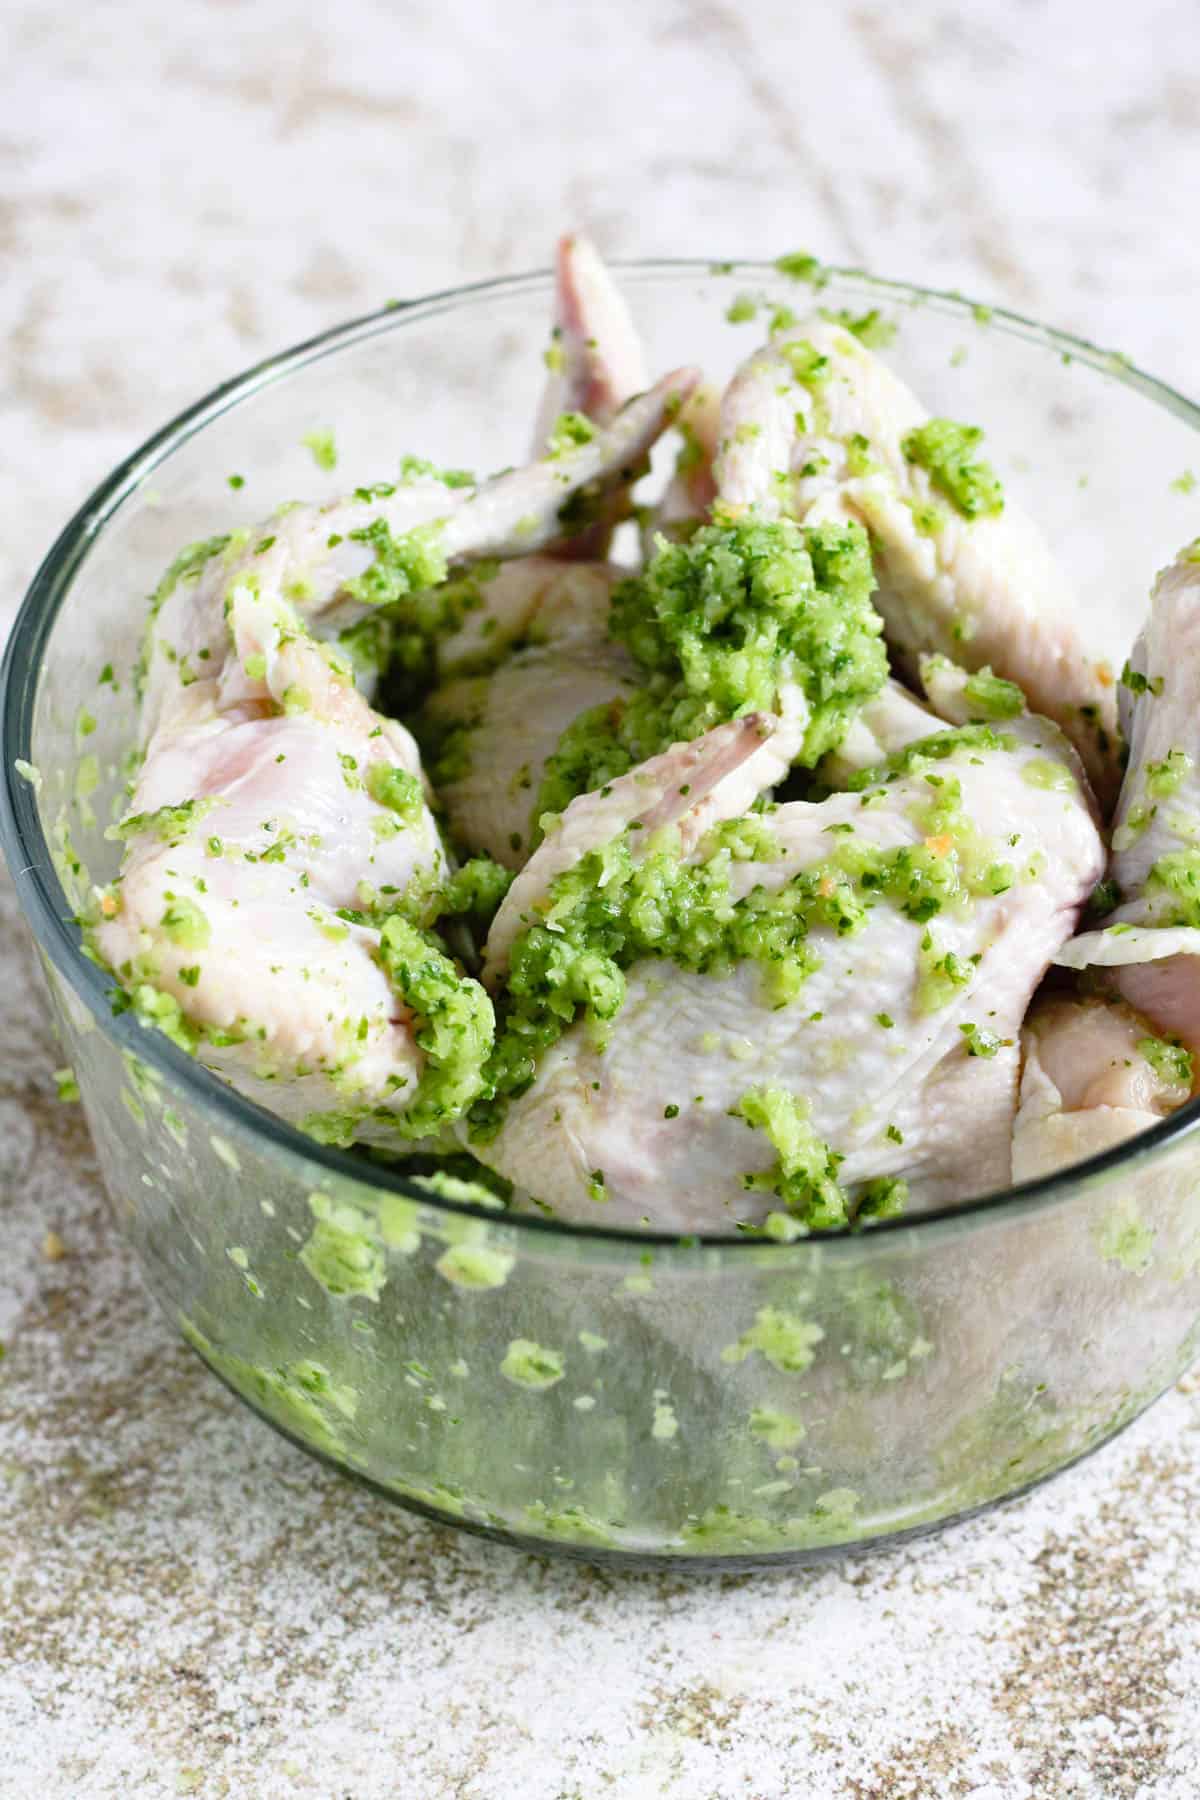 Chicken wings marinating in green sauce